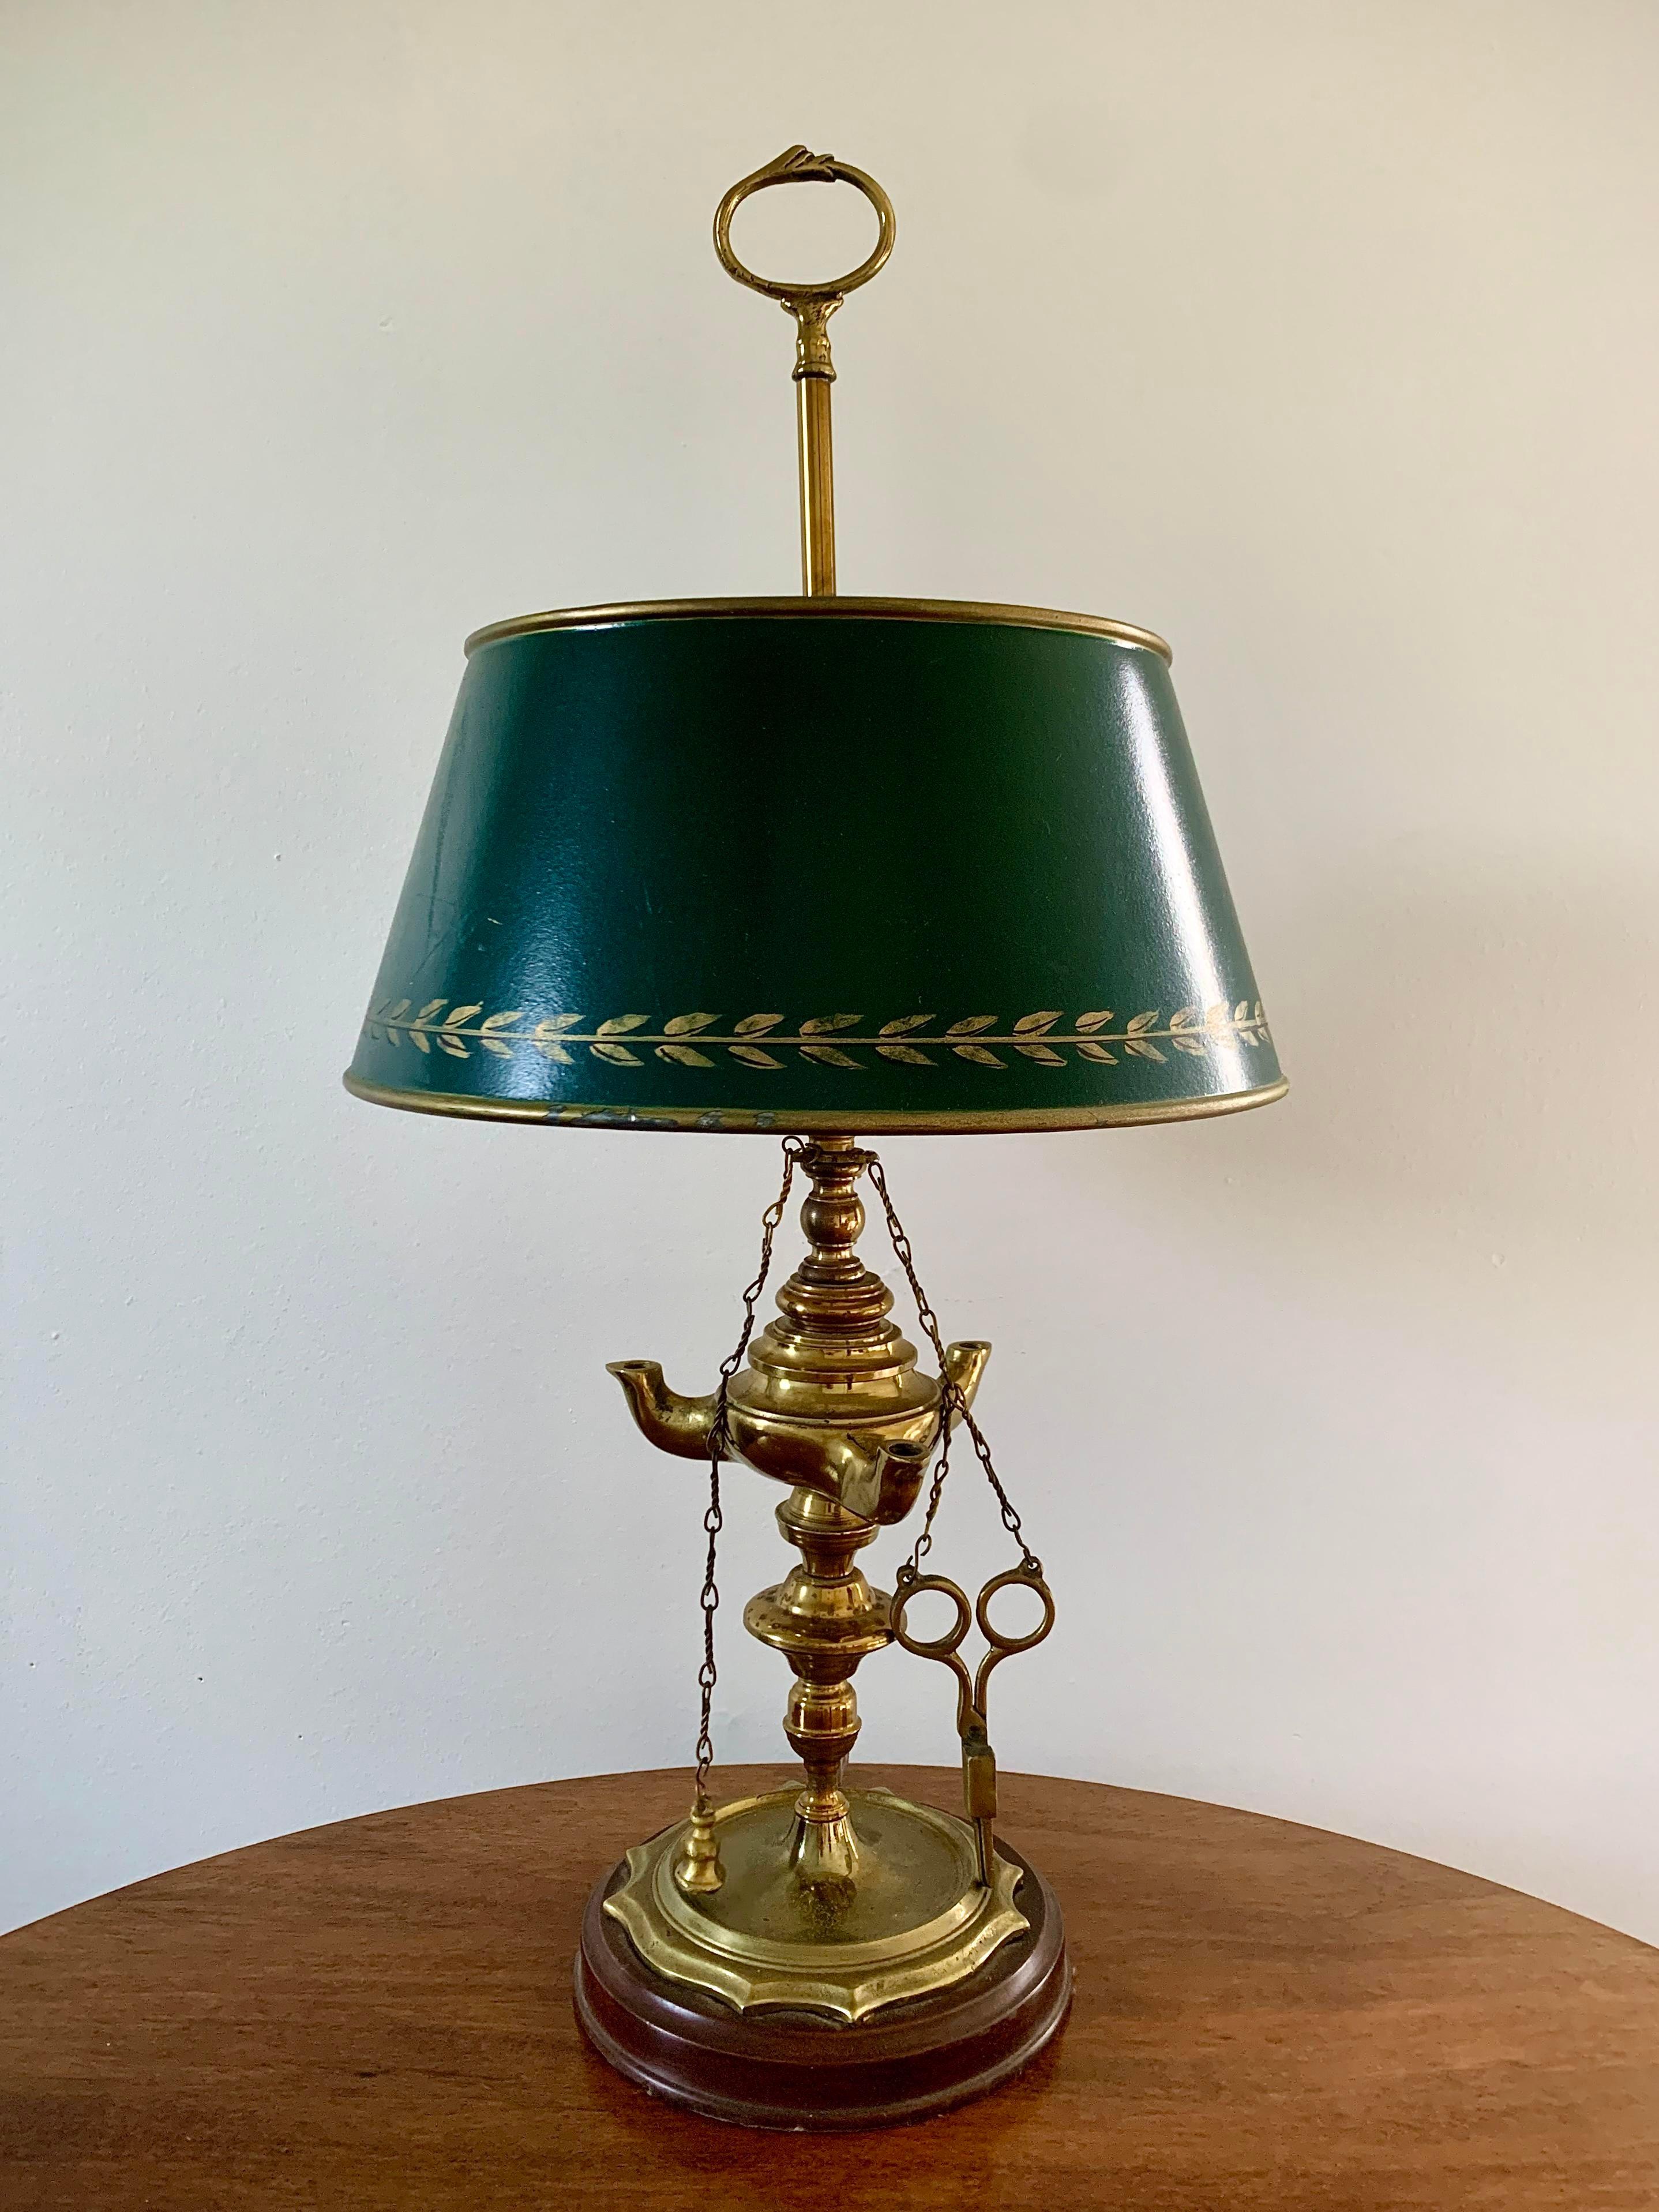 French Provincial Mid-20th Century Brass Bouillotte Lamp with Green Tole Shade